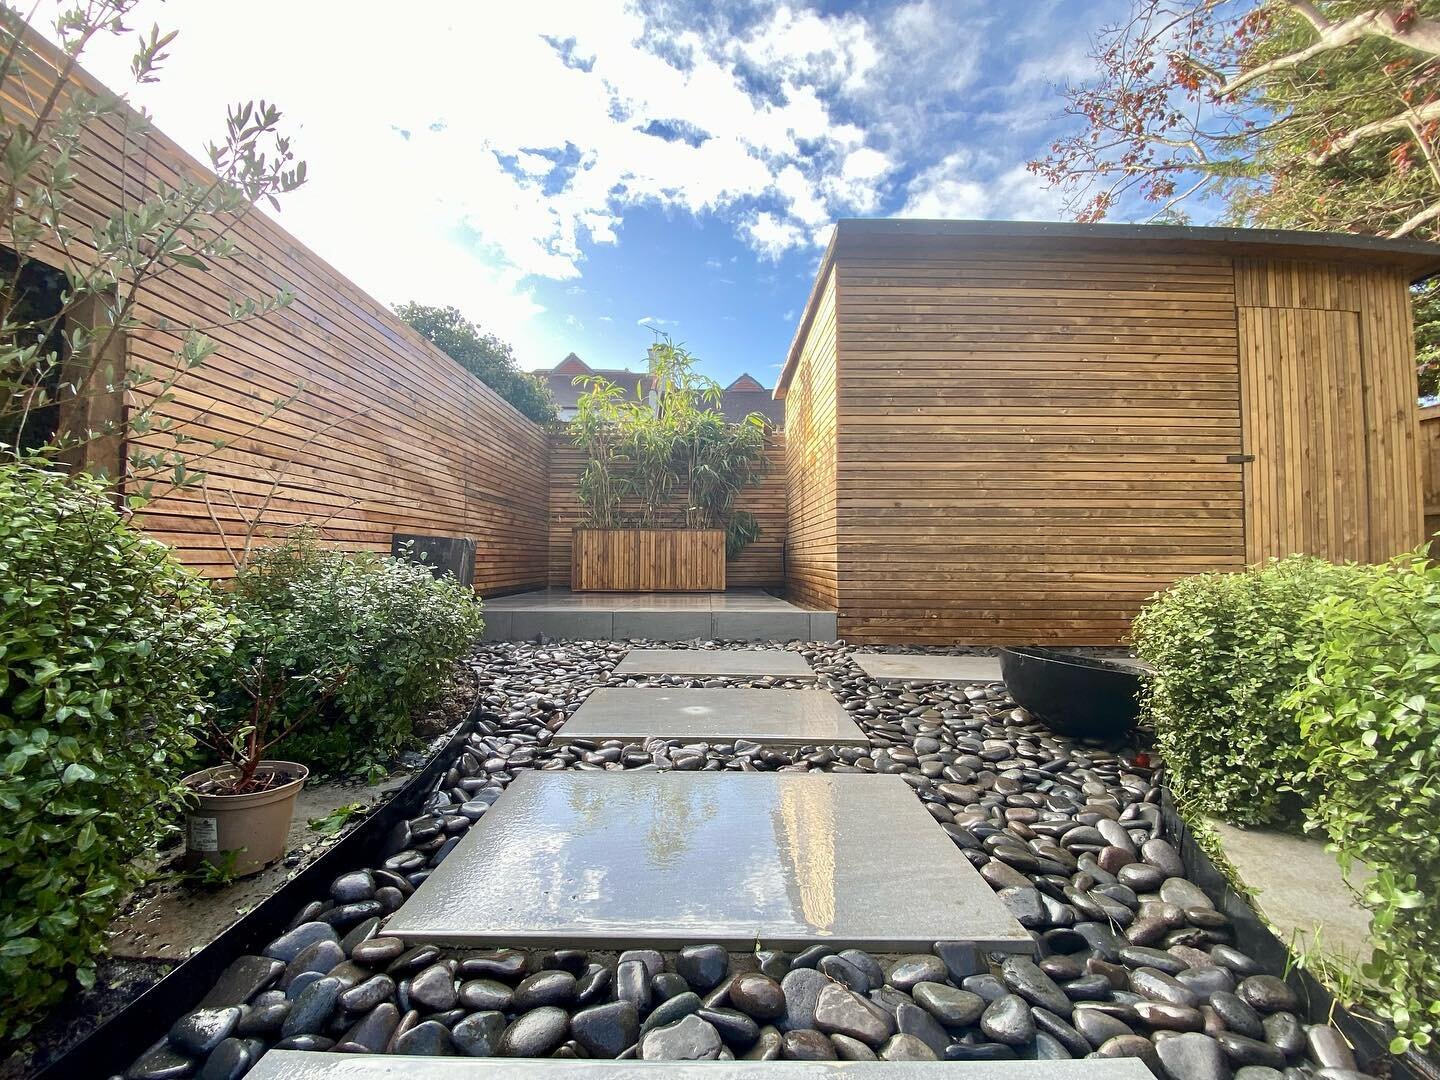 Build completed in Muswell Hill. Porcelain pathway and raised patio area at the rear, stone as always from @_londonstone and delightful large pebbles from @cedstonegroup

We cladded the existing outhouse and built a trellis area and fence to create p